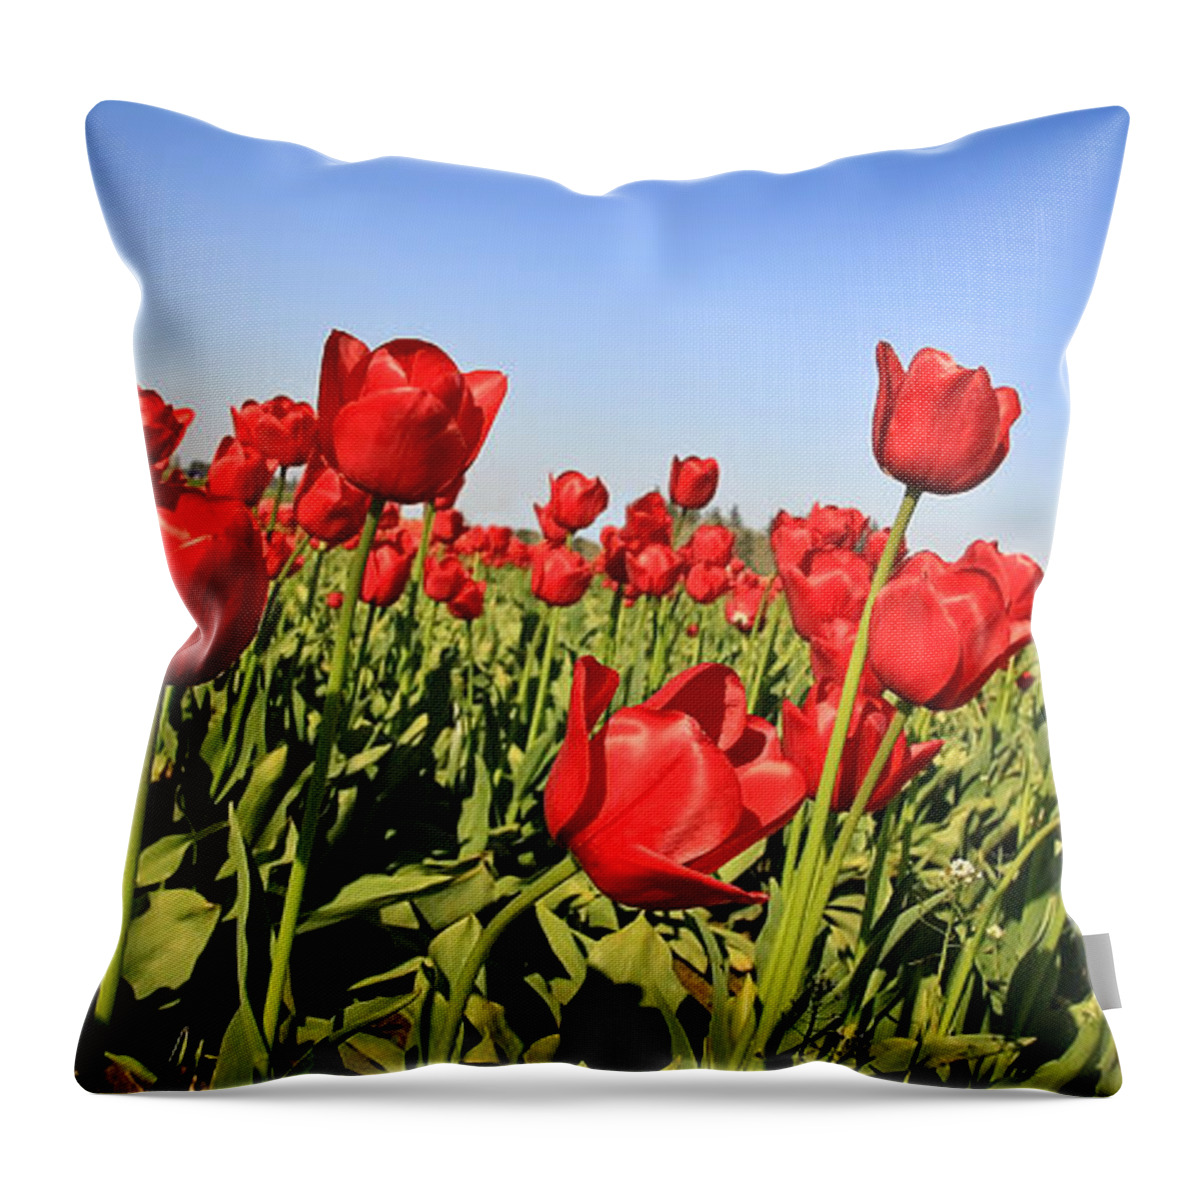 Flowers Throw Pillow featuring the photograph Tulip Field by Steve McKinzie